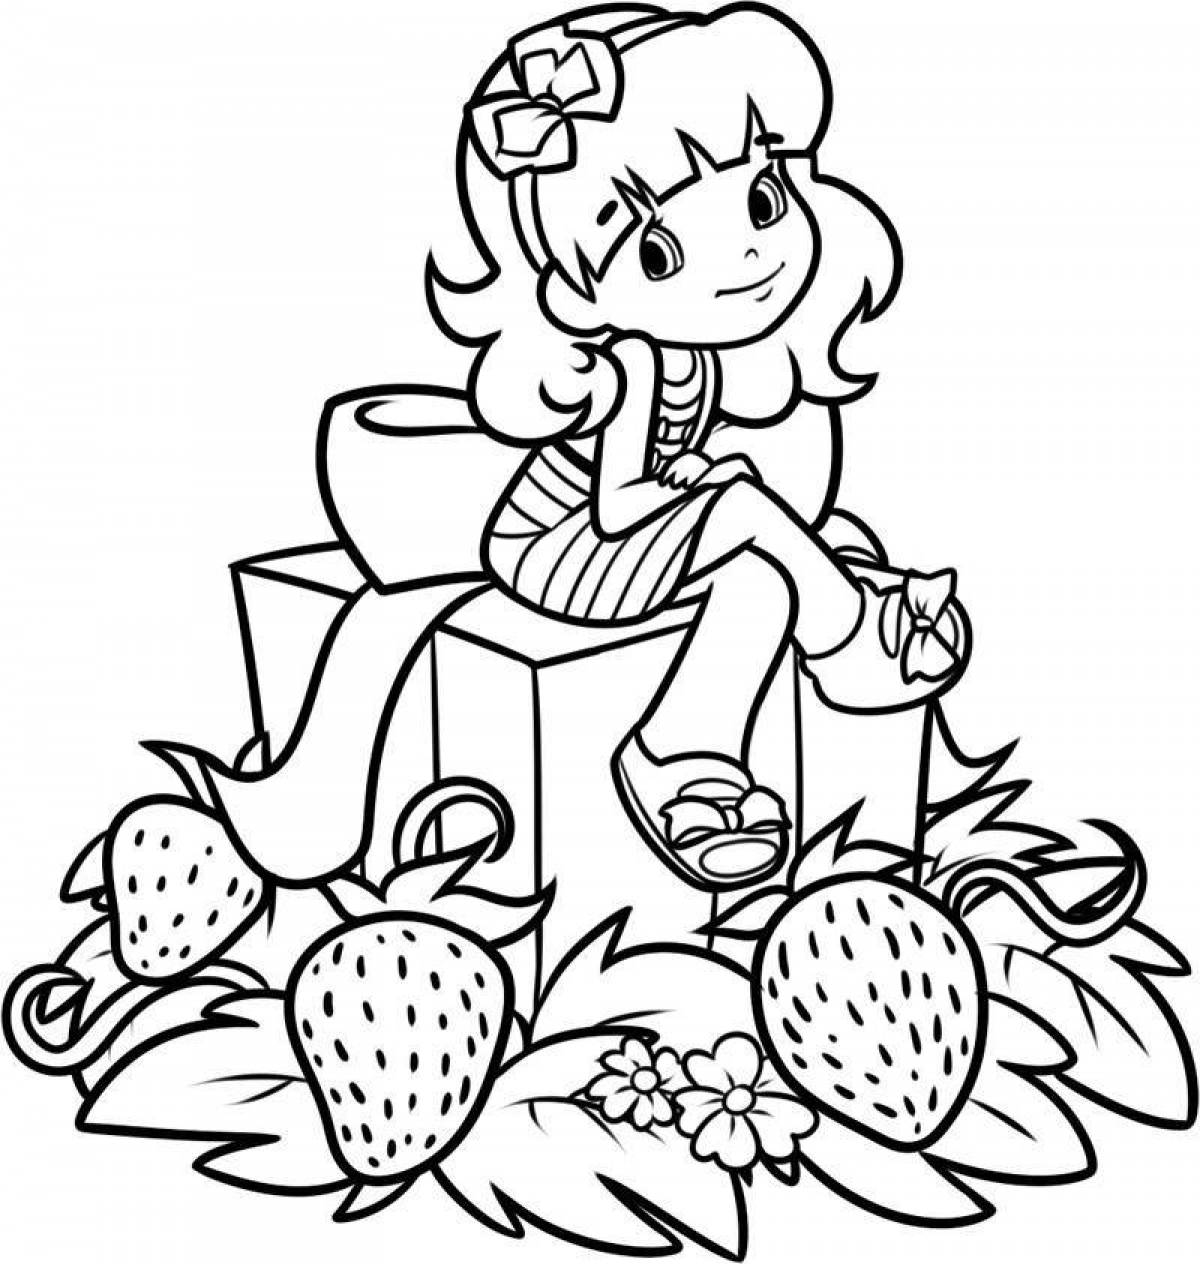 Coloring pages for girls 6 7